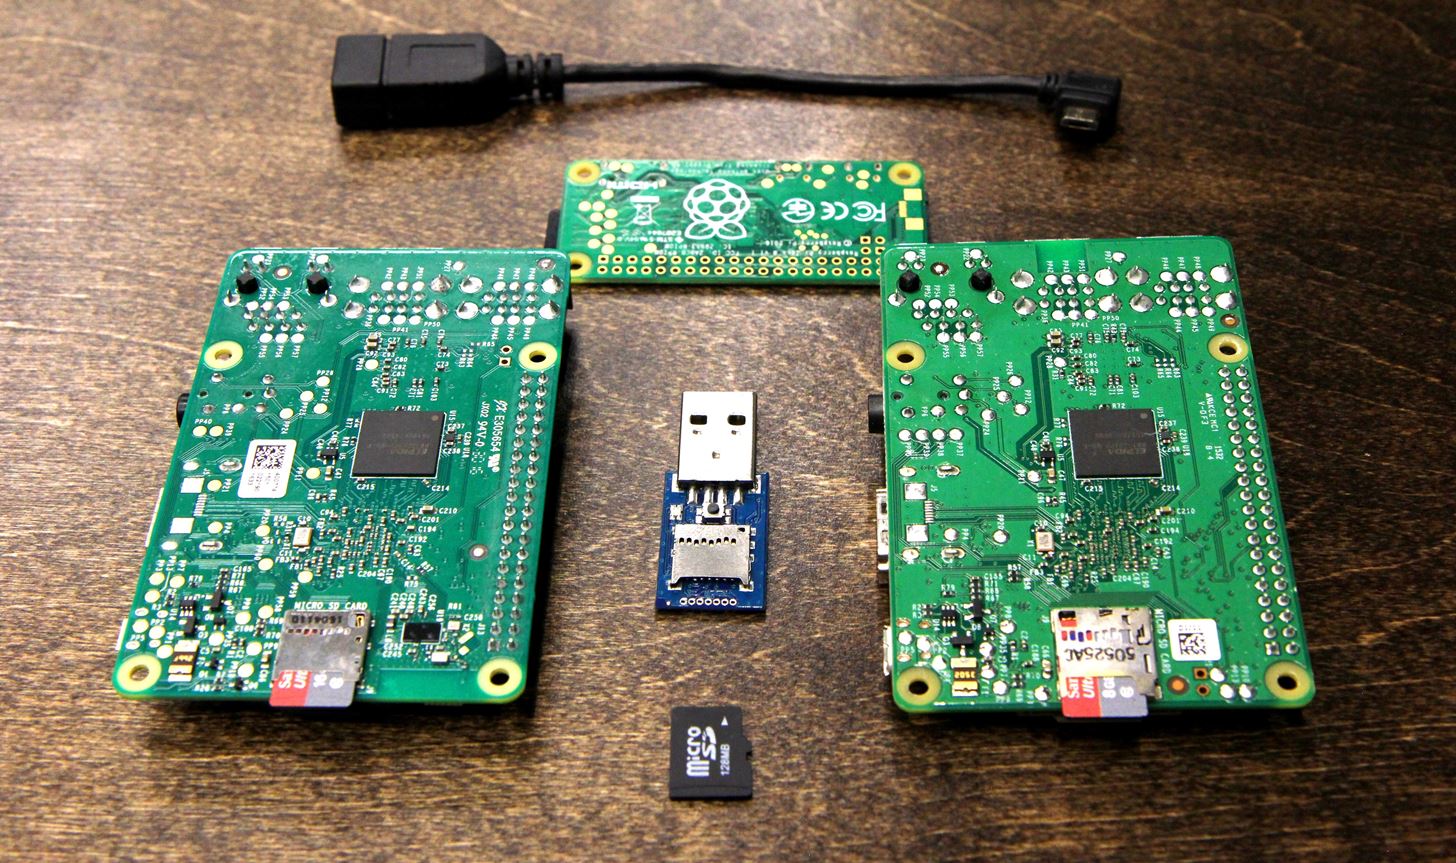 How to Modify the USB Rubber Ducky with Custom Firmware